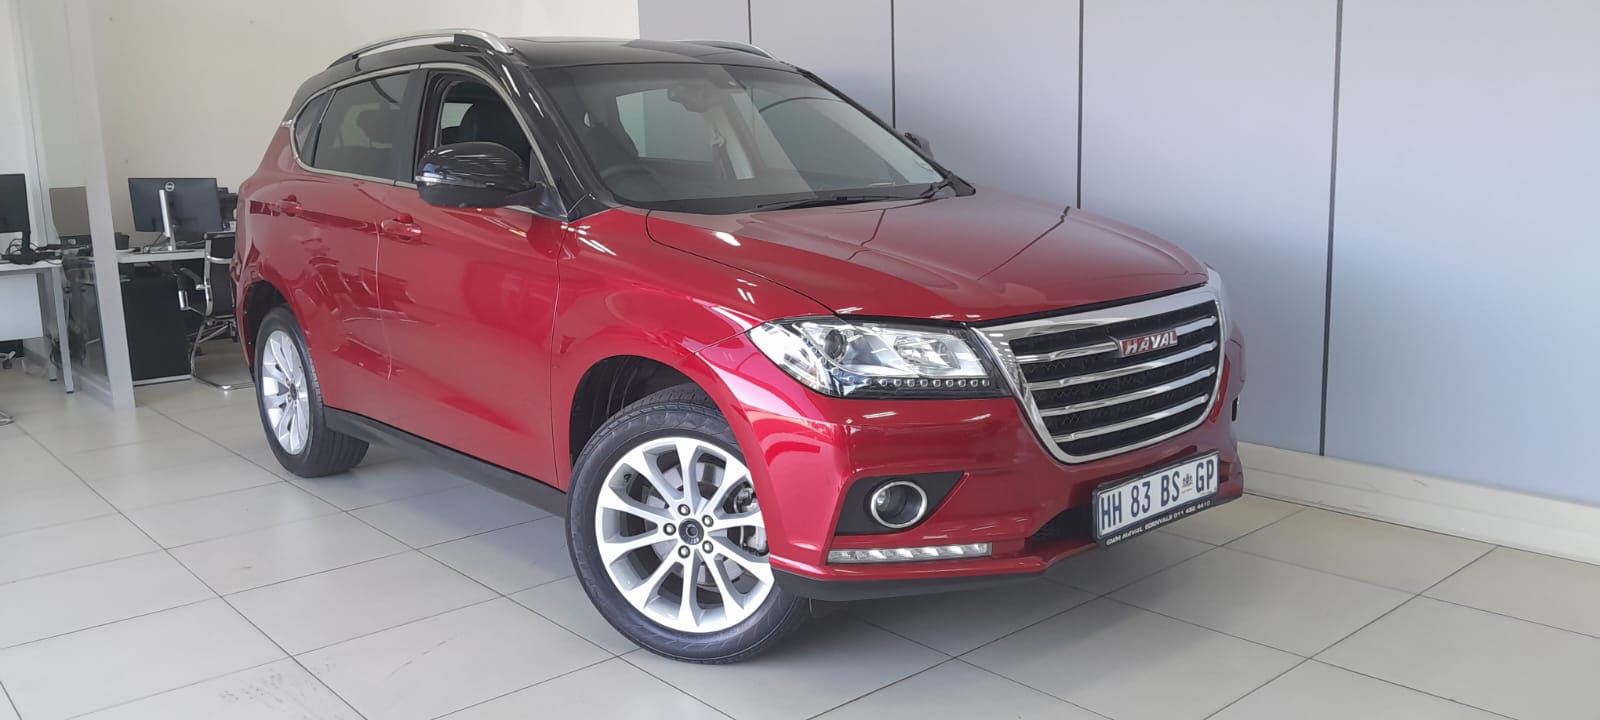 2018 Haval H2  for sale - UH70786